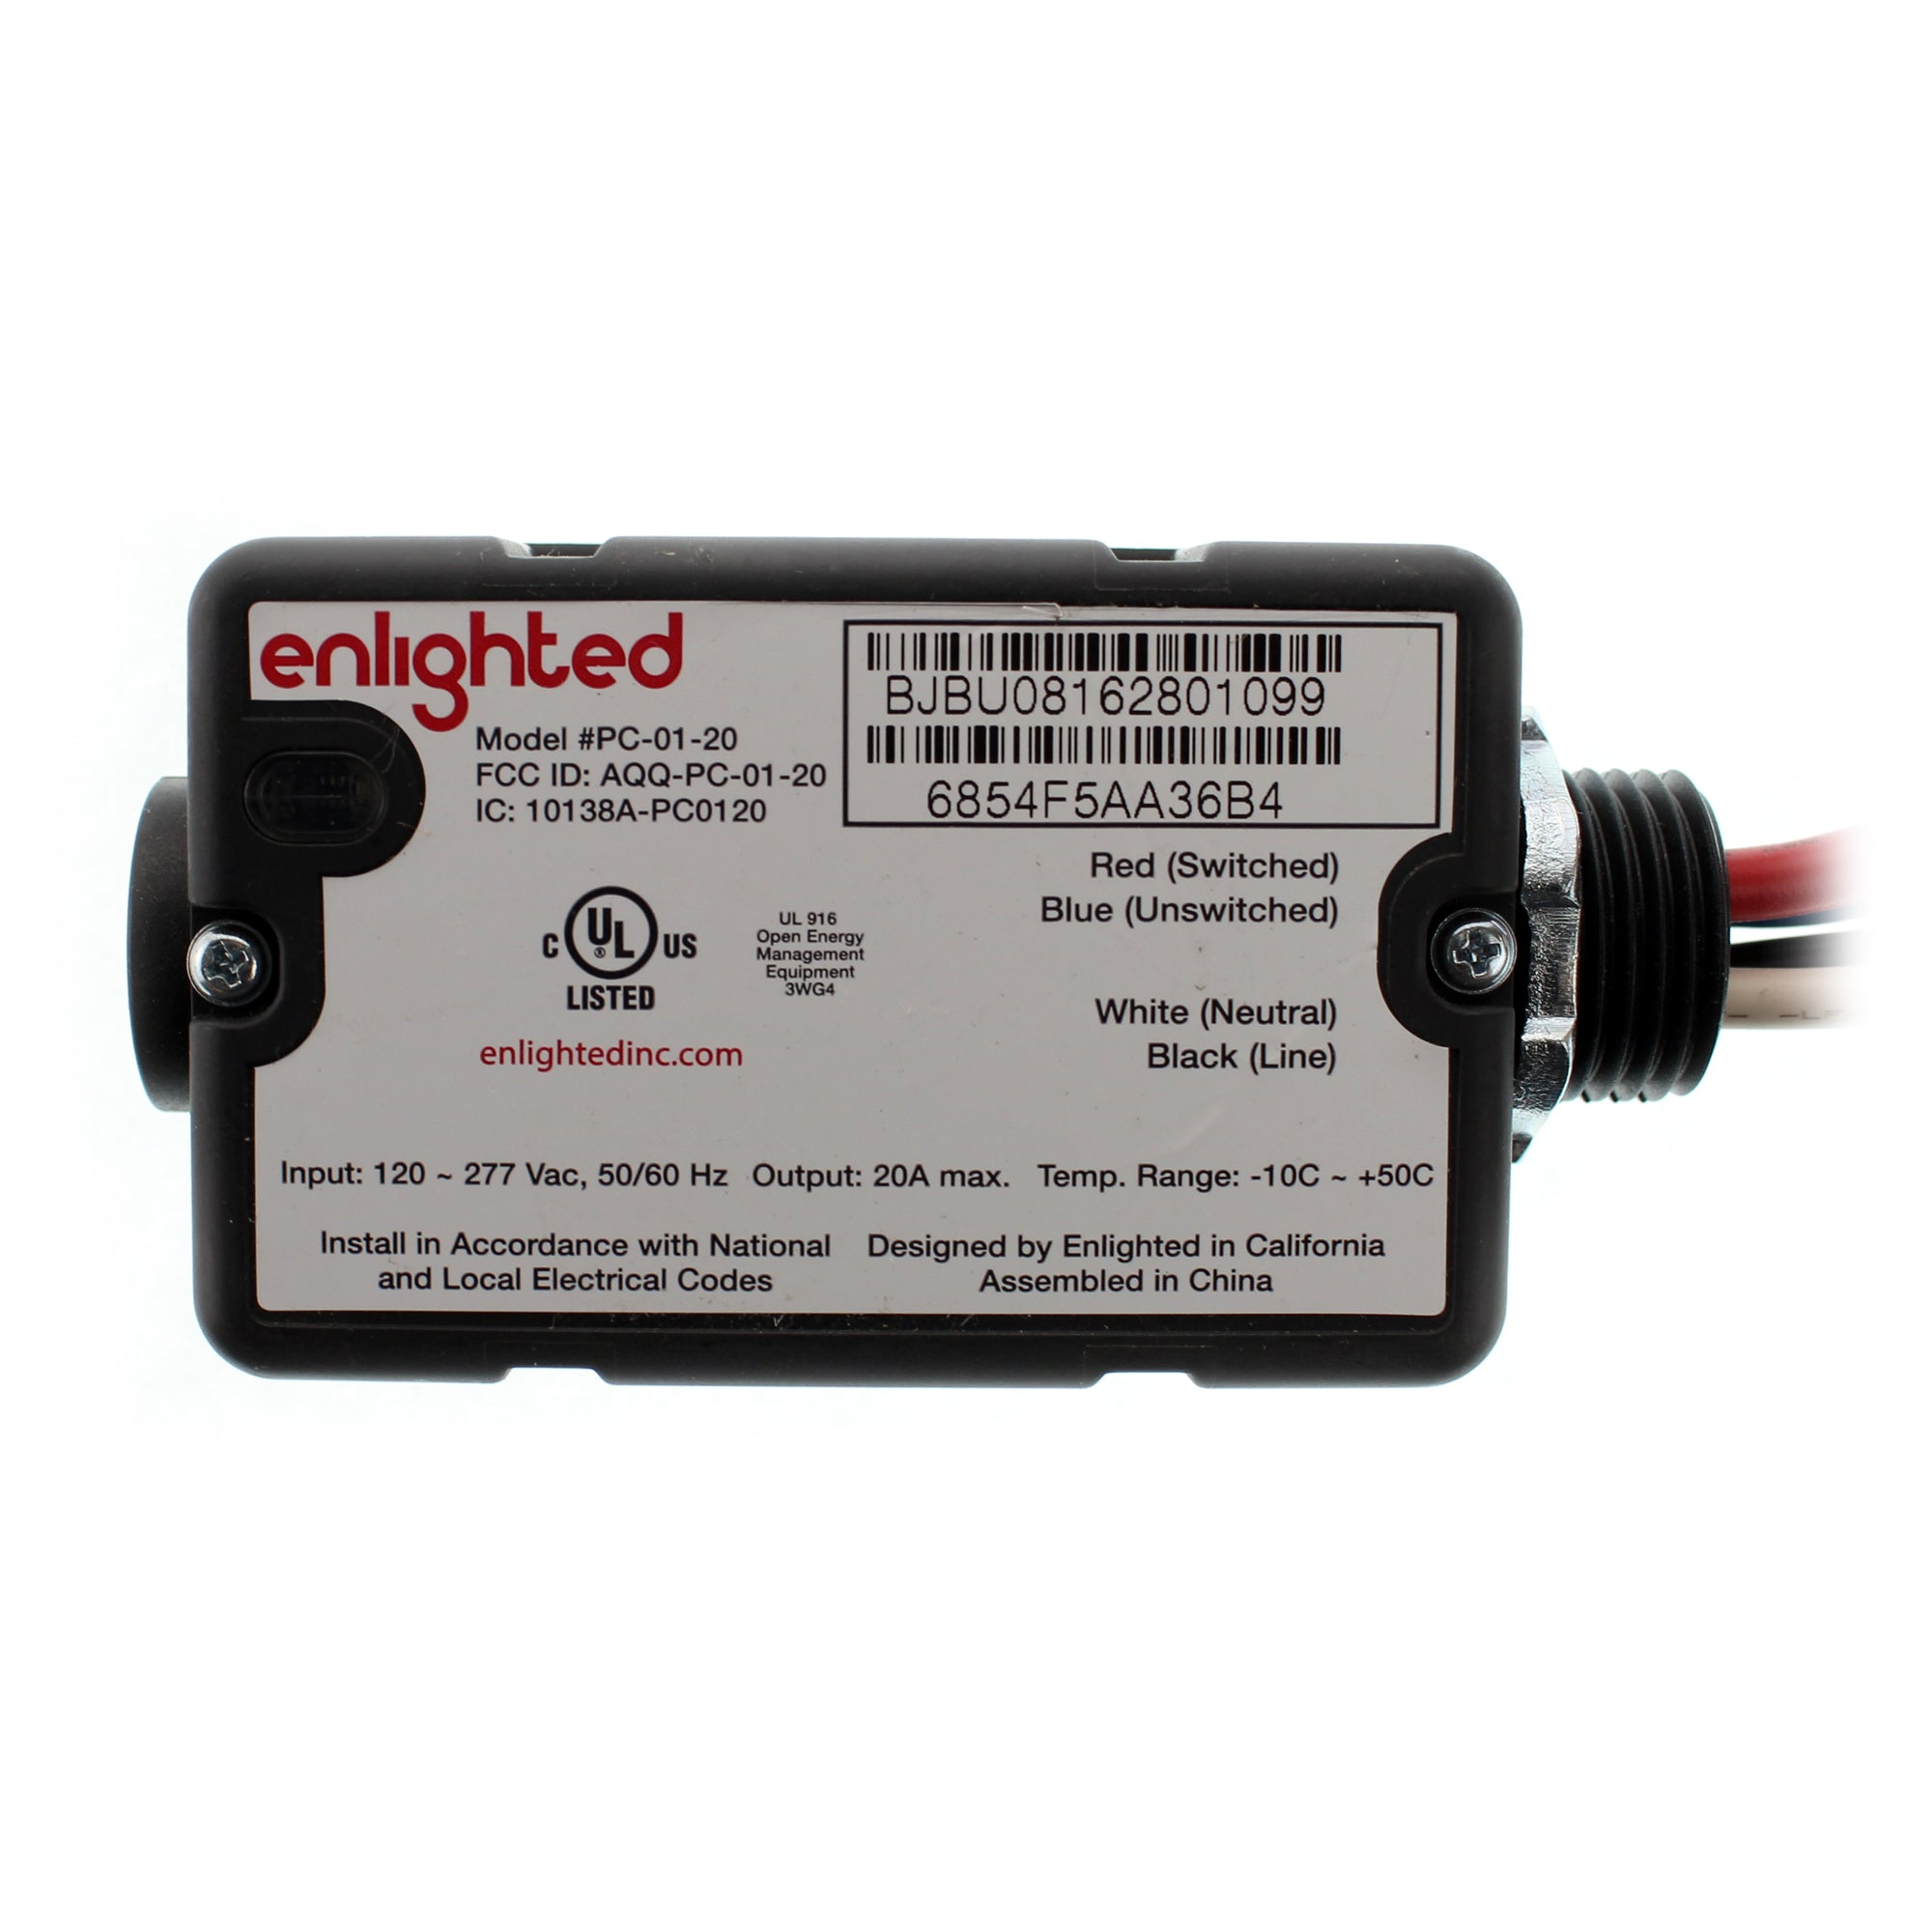 Enlightened Lighting, ENLIGHTED LIGHTING PC-01-20 MAX-PLUG LOAD CONTROLLER, 120/277V, 20A, 4-WIRE